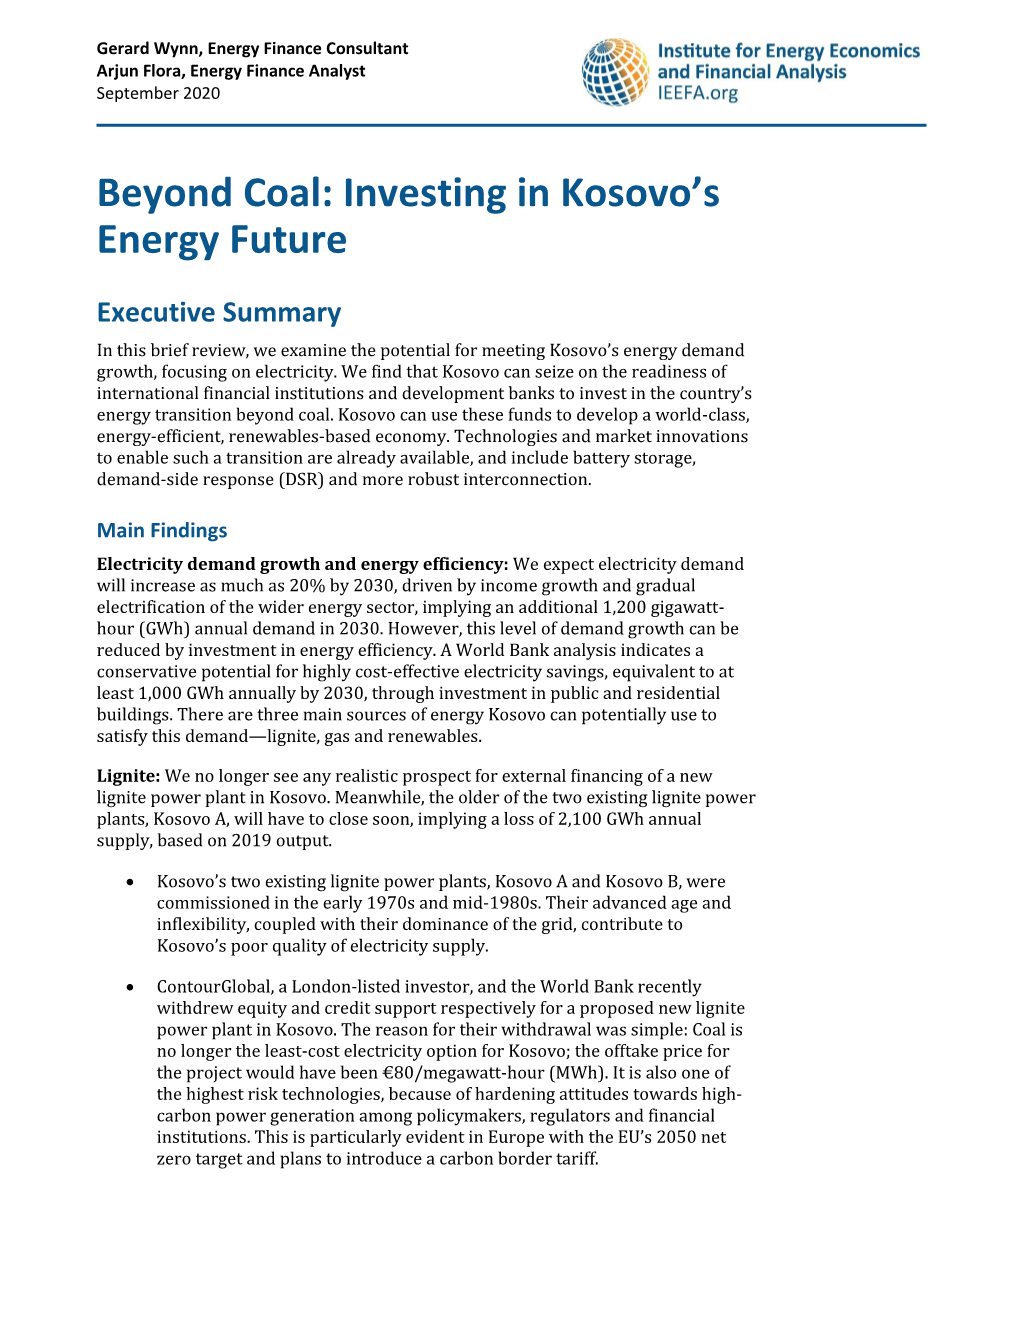 Beyond Coal: Investing in Kosovo's Energy Future